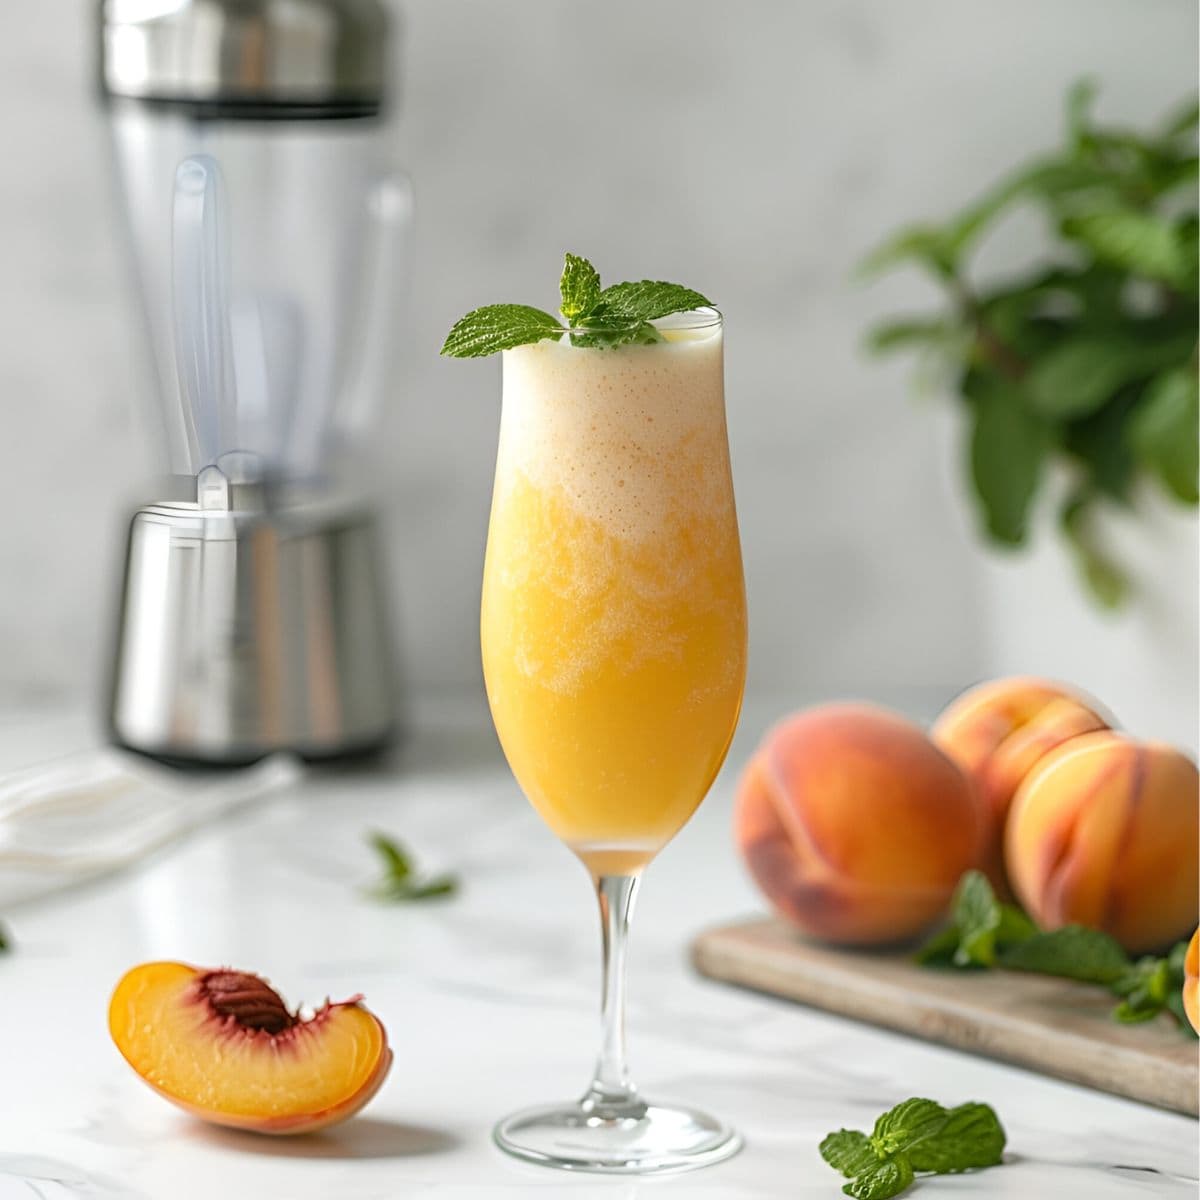 Peach Bellini with Mint in a Champagne Flute on a White Marble Table with Fresh Peaches and Mint on a Cutting Board and a Blender in the Background